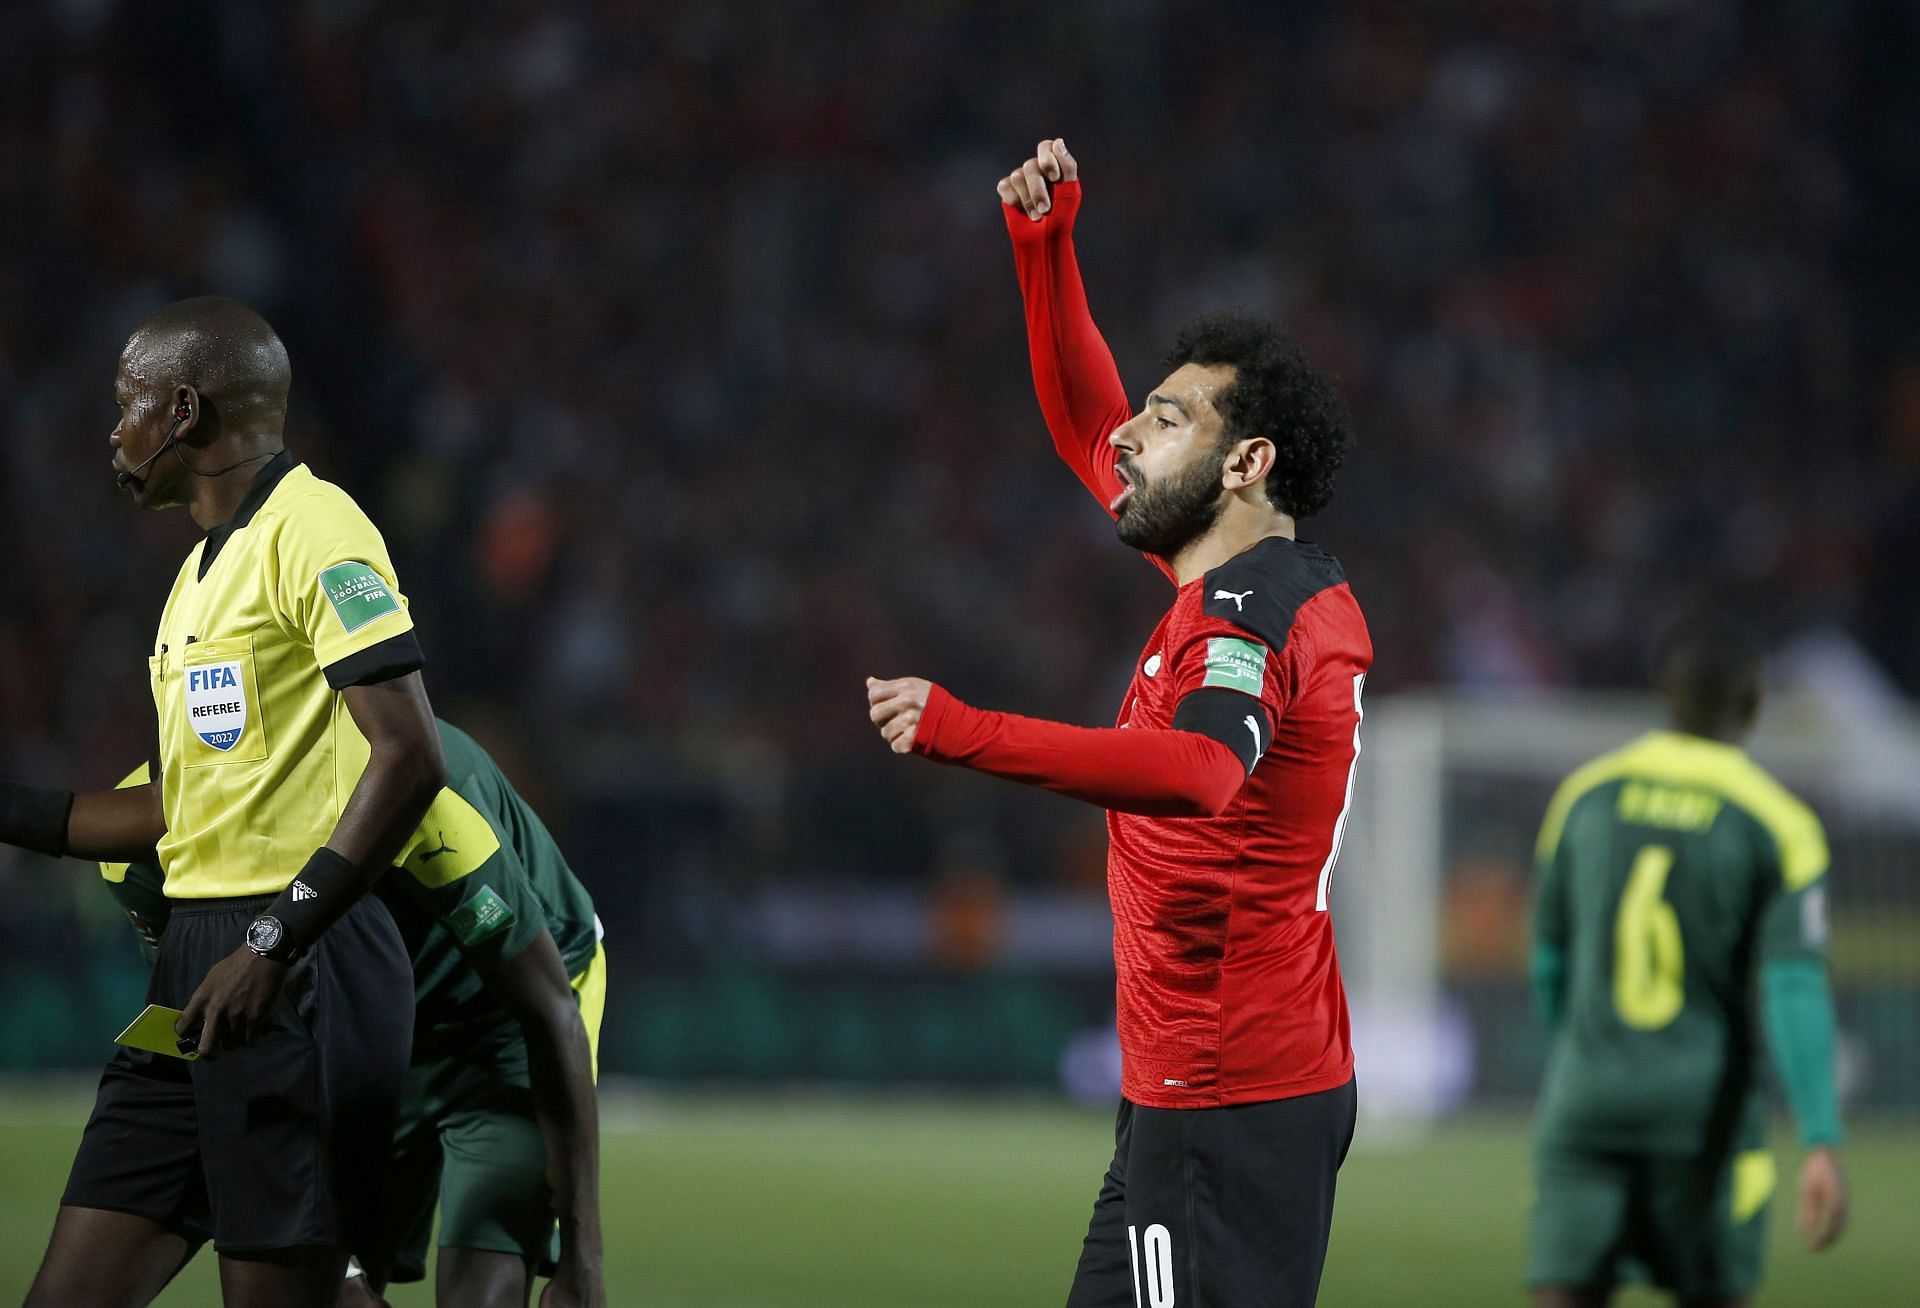 Egypt face Ethiopia in their AFCON qualifying fixture on Thursday